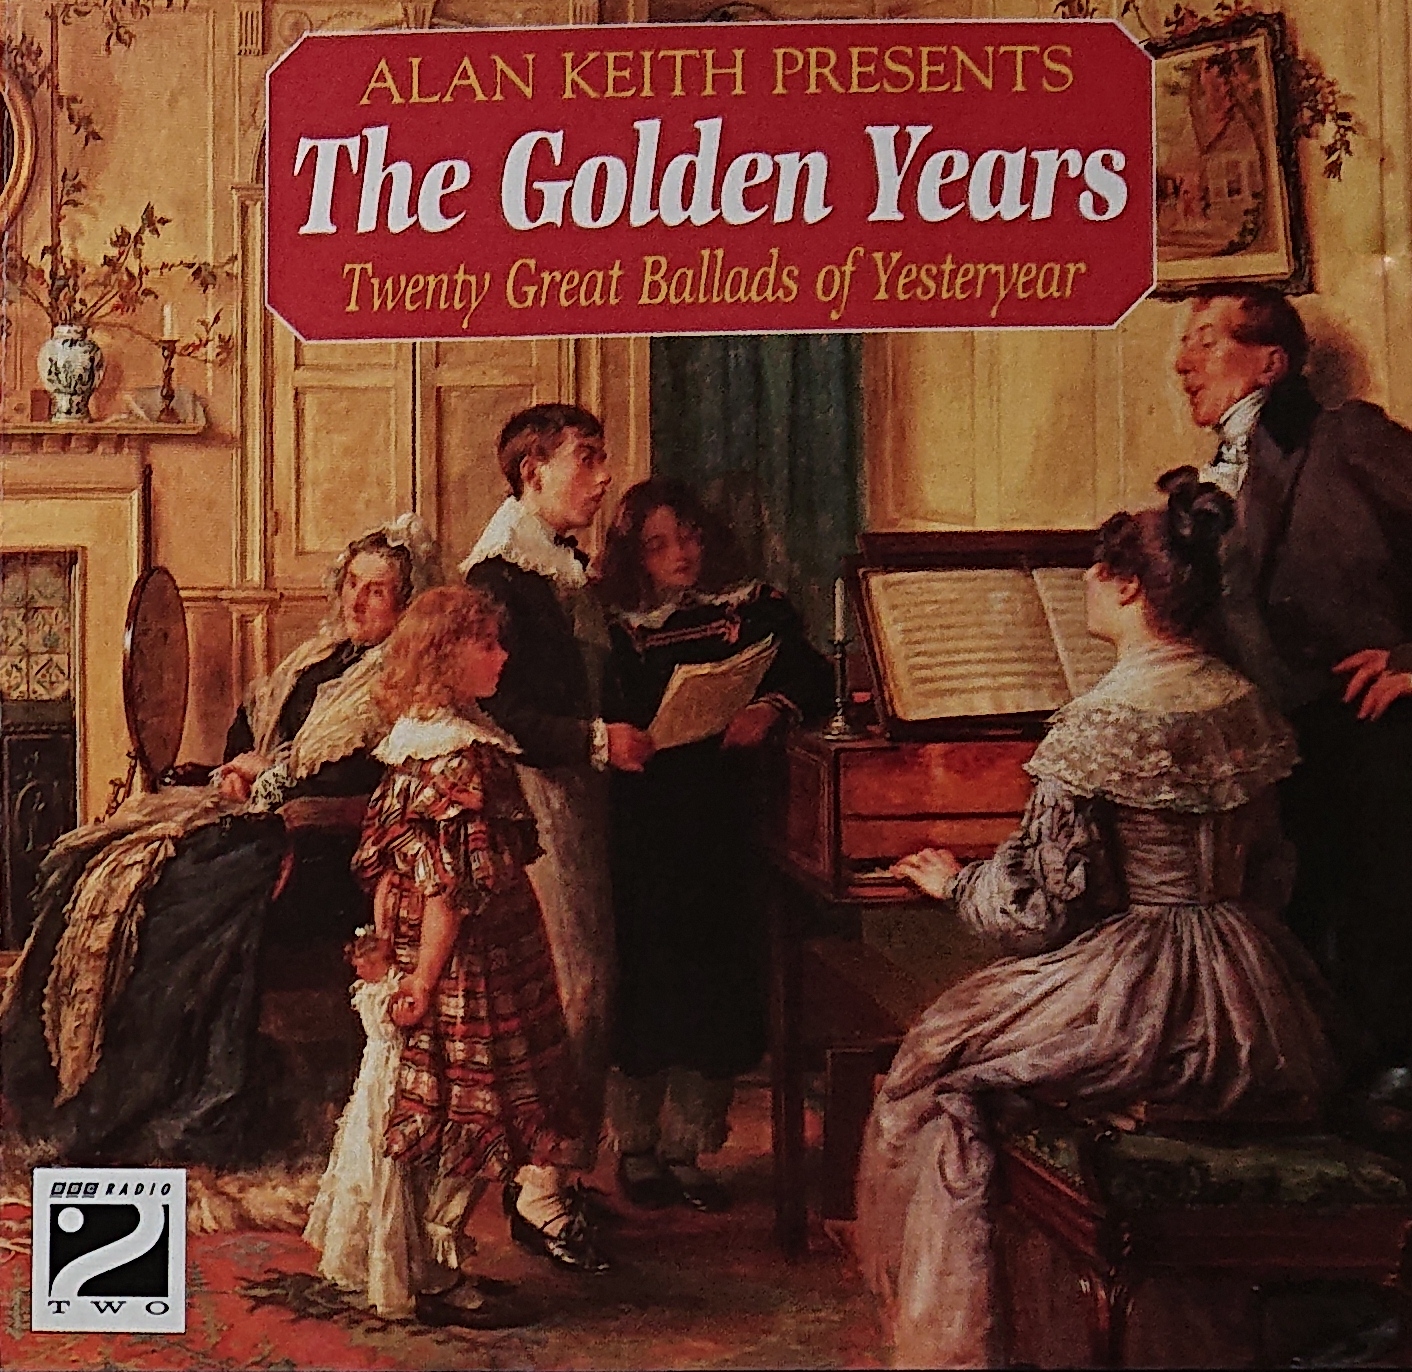 Picture of BBCCD796 The golden years by artist Alan Keith from the BBC cds - Records and Tapes library